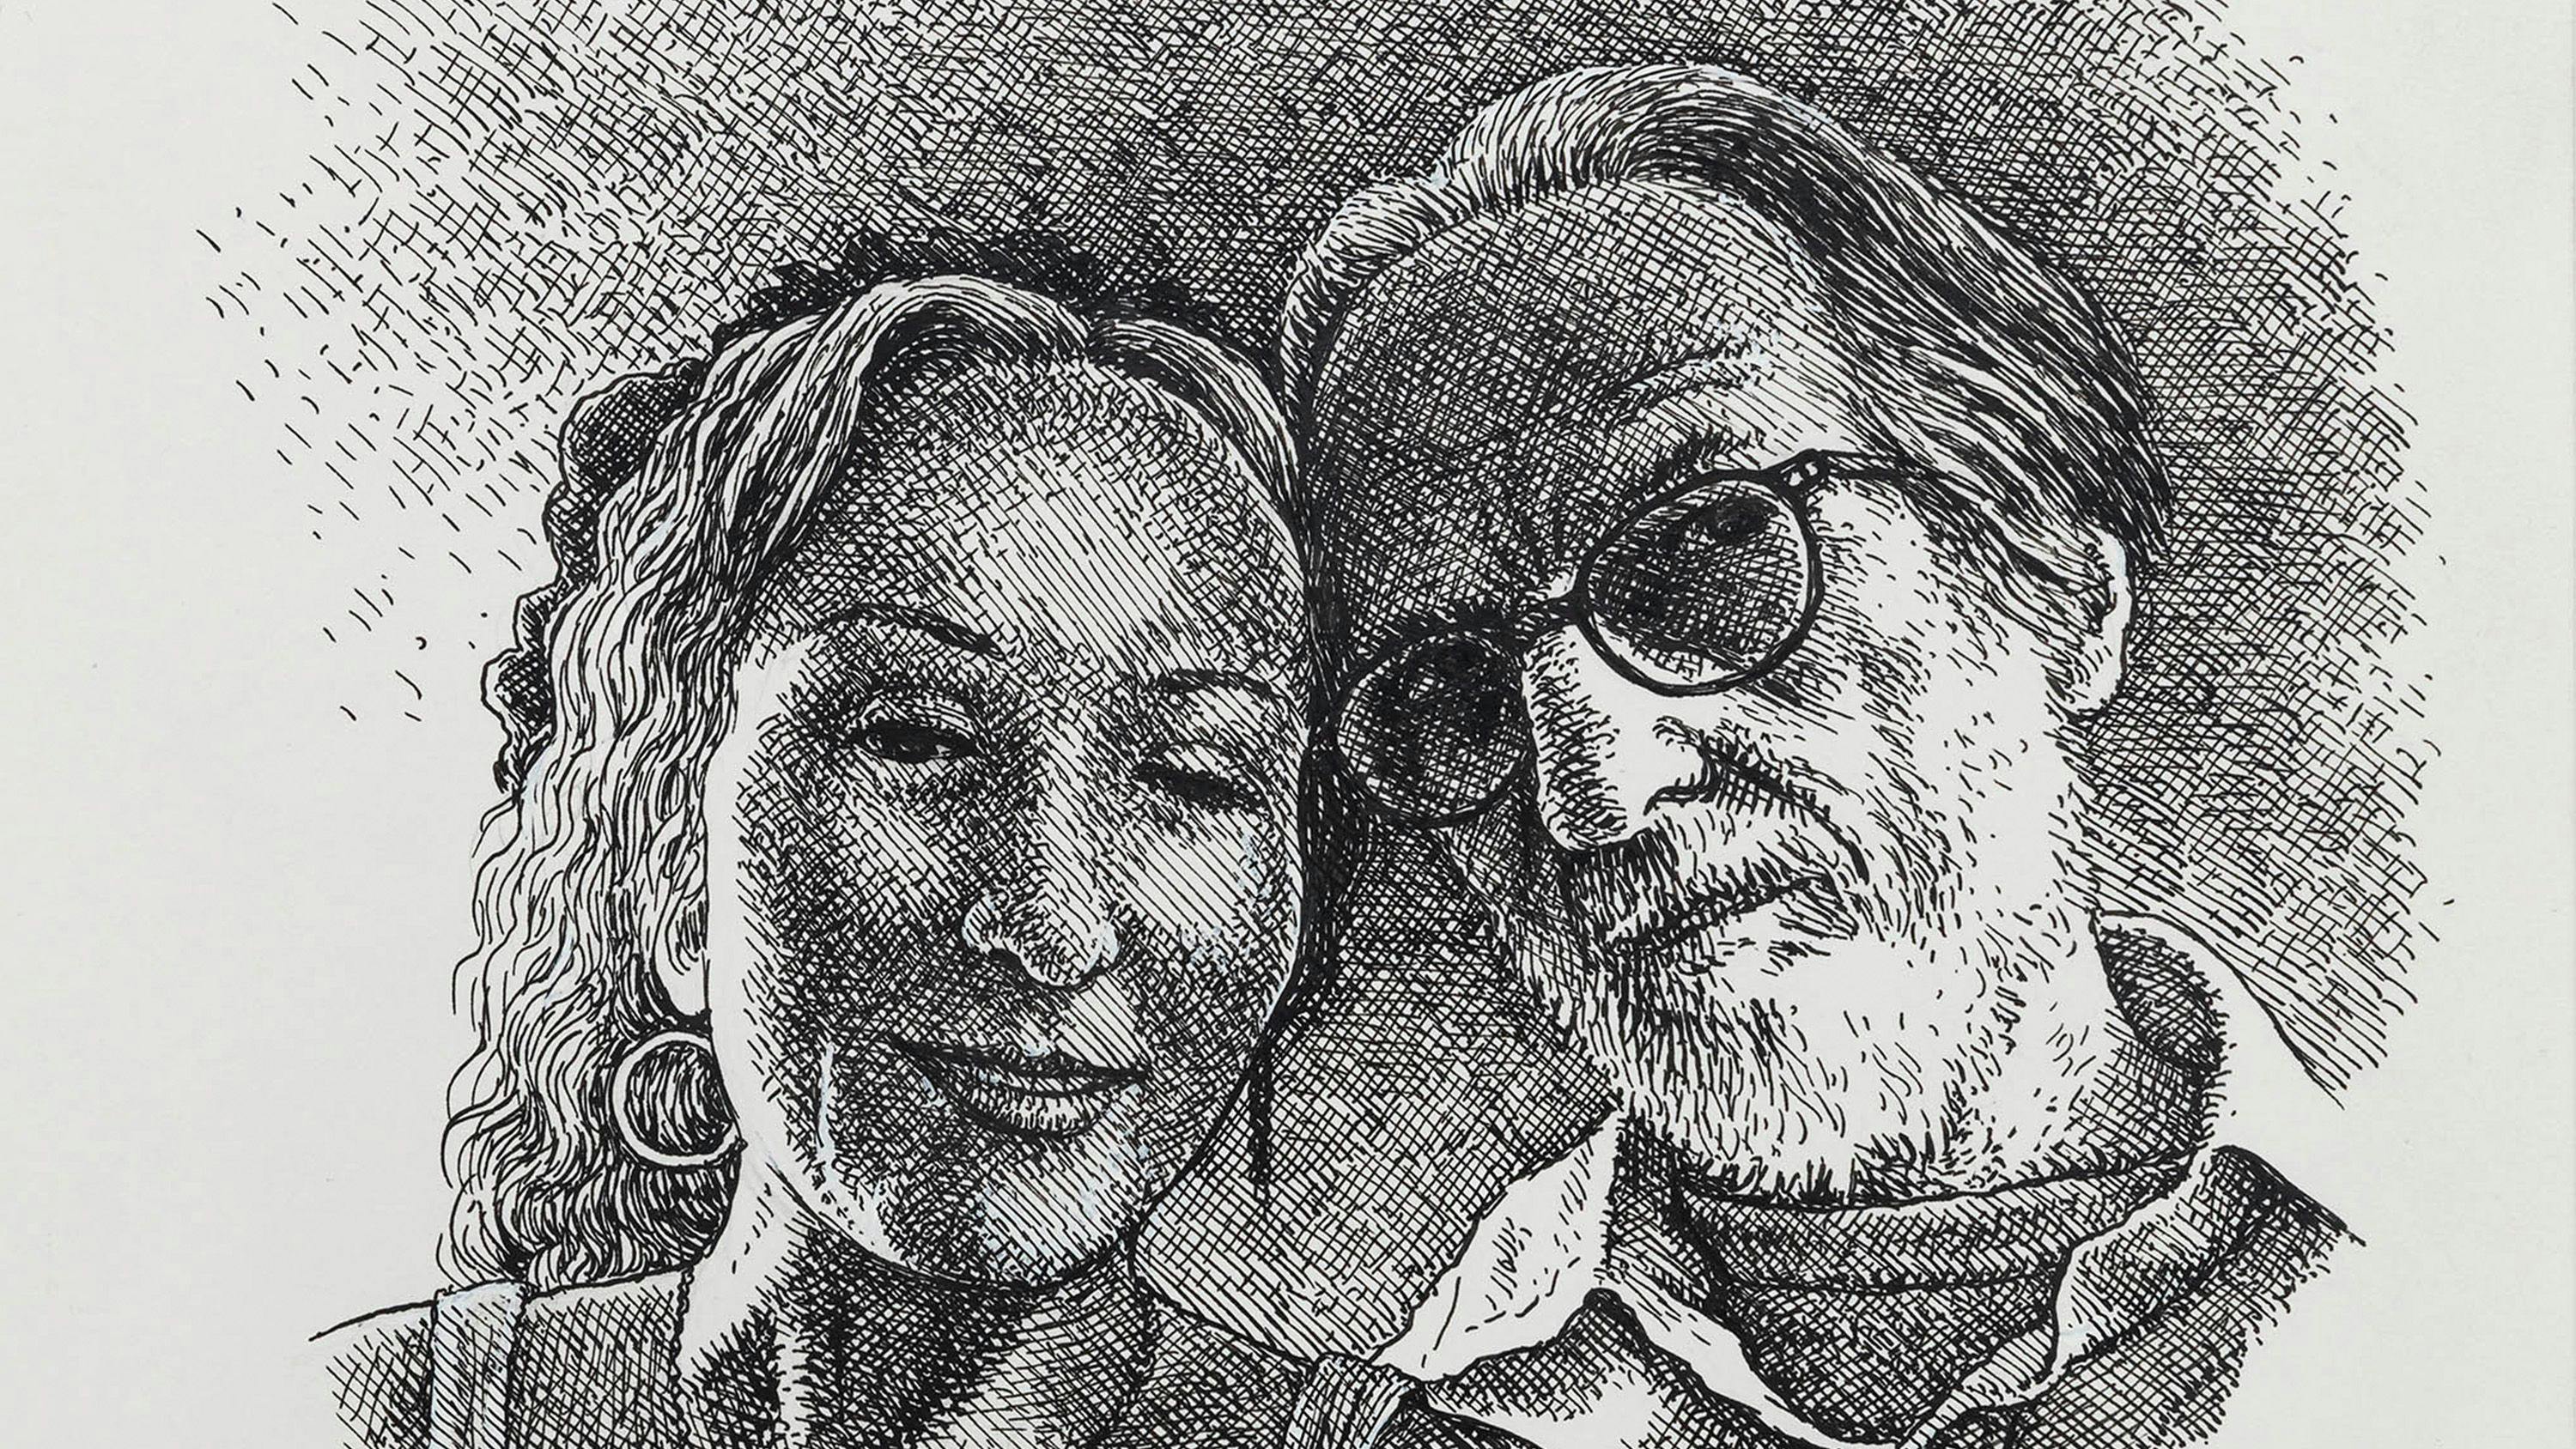 A detail from an R. Crumb drawing titled, "That Wacky Cartoon Couple Aline & R. Crumb" dated 2021